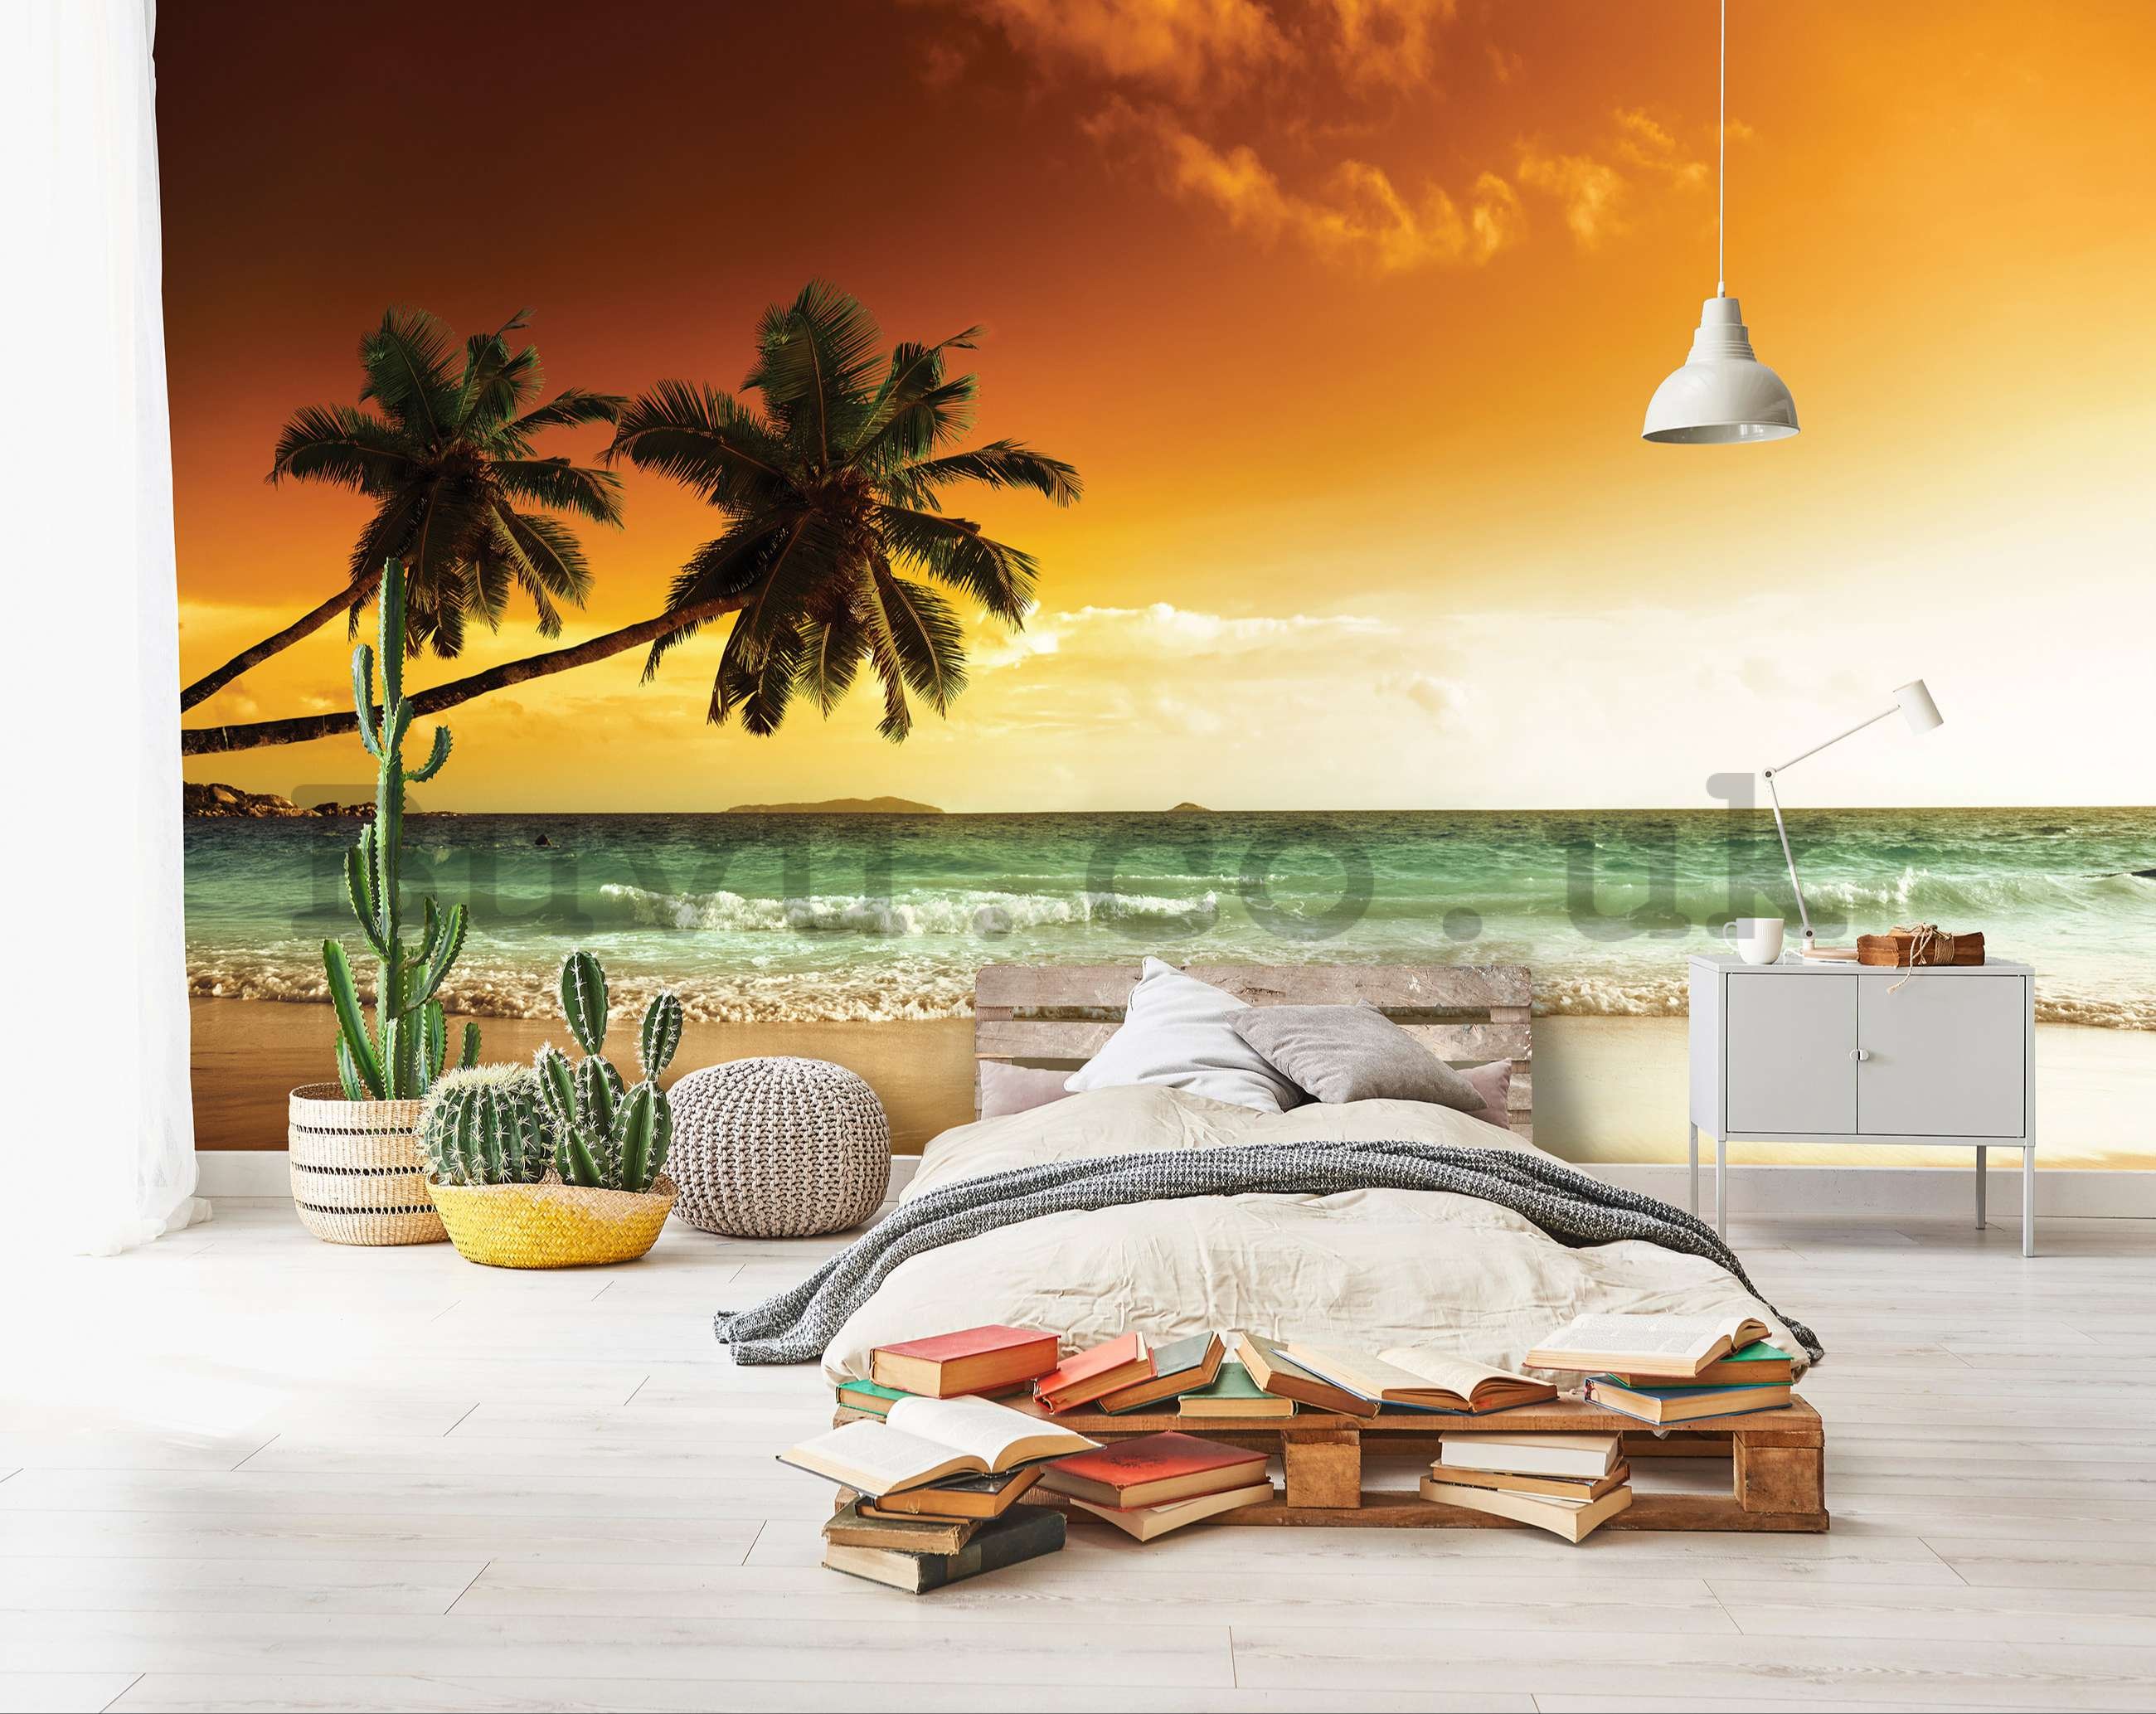 Wall mural vlies: Palm trees and beach at sunset - 368x254 cm